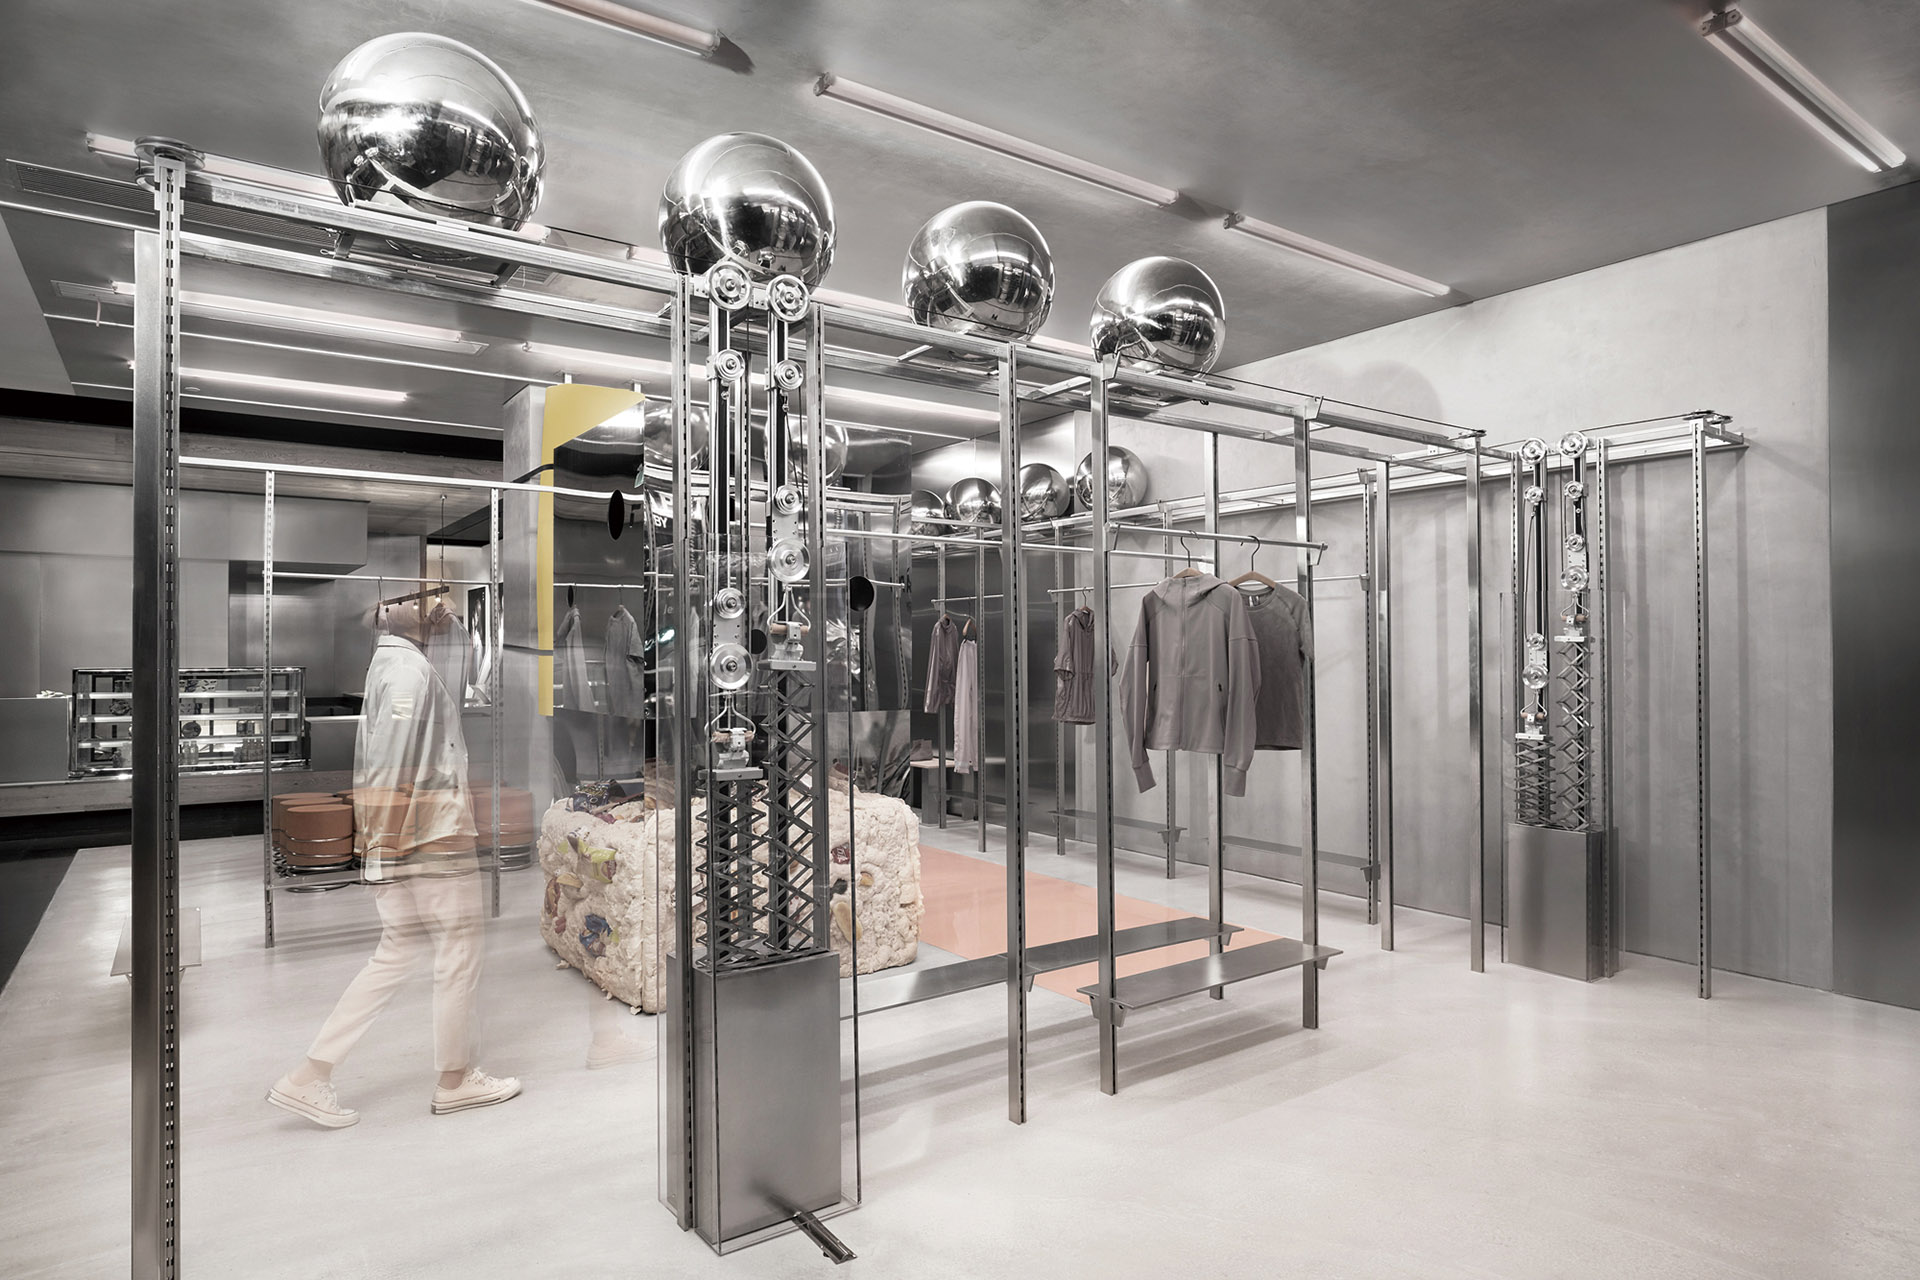 Futuristic sportswear shop: the Peu à Peu design displays the principles of fitness with robots and moving reflective spheres